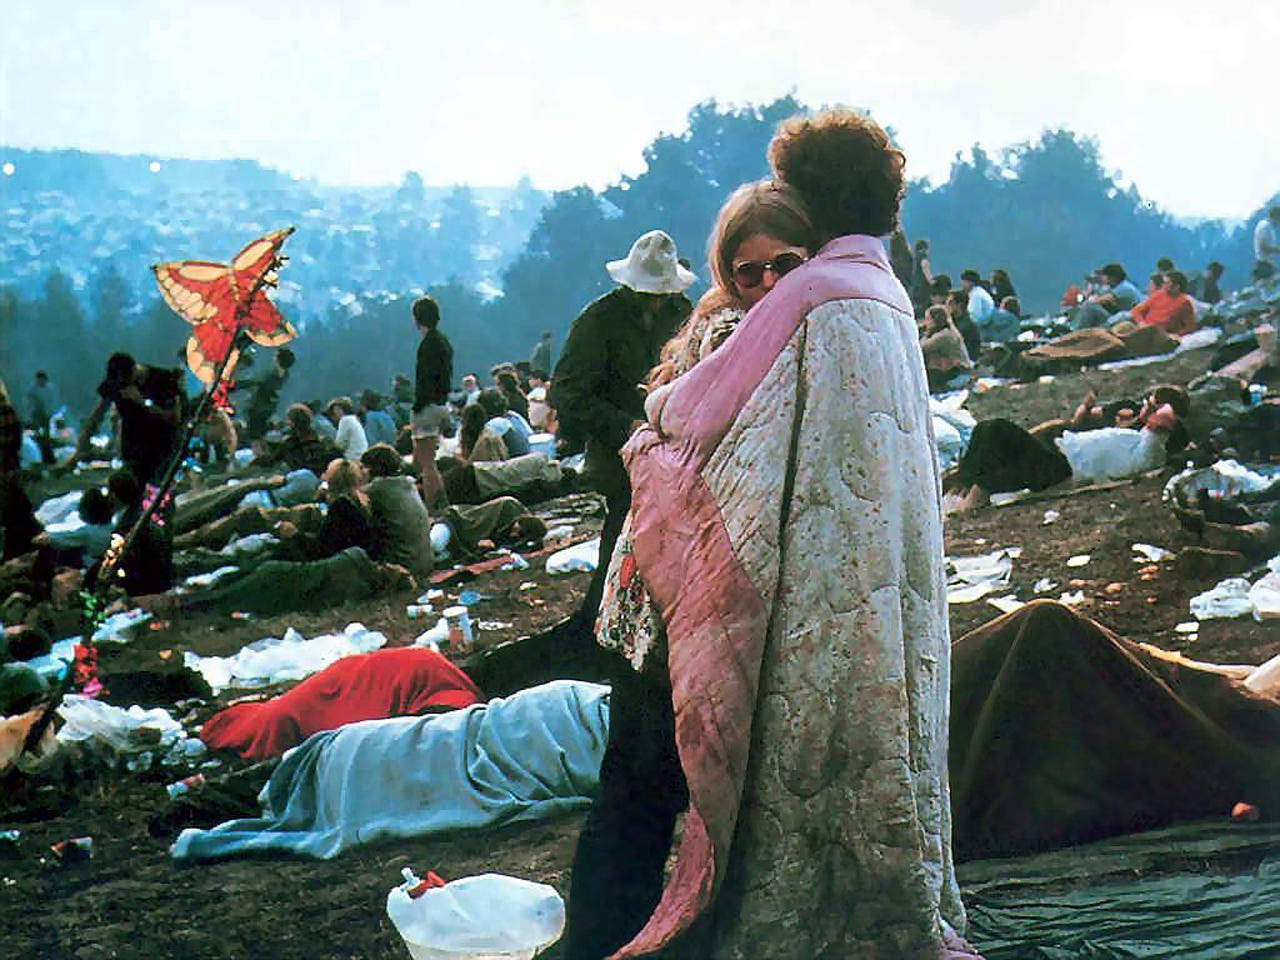 Woodstock picture of couple embracing with blankets